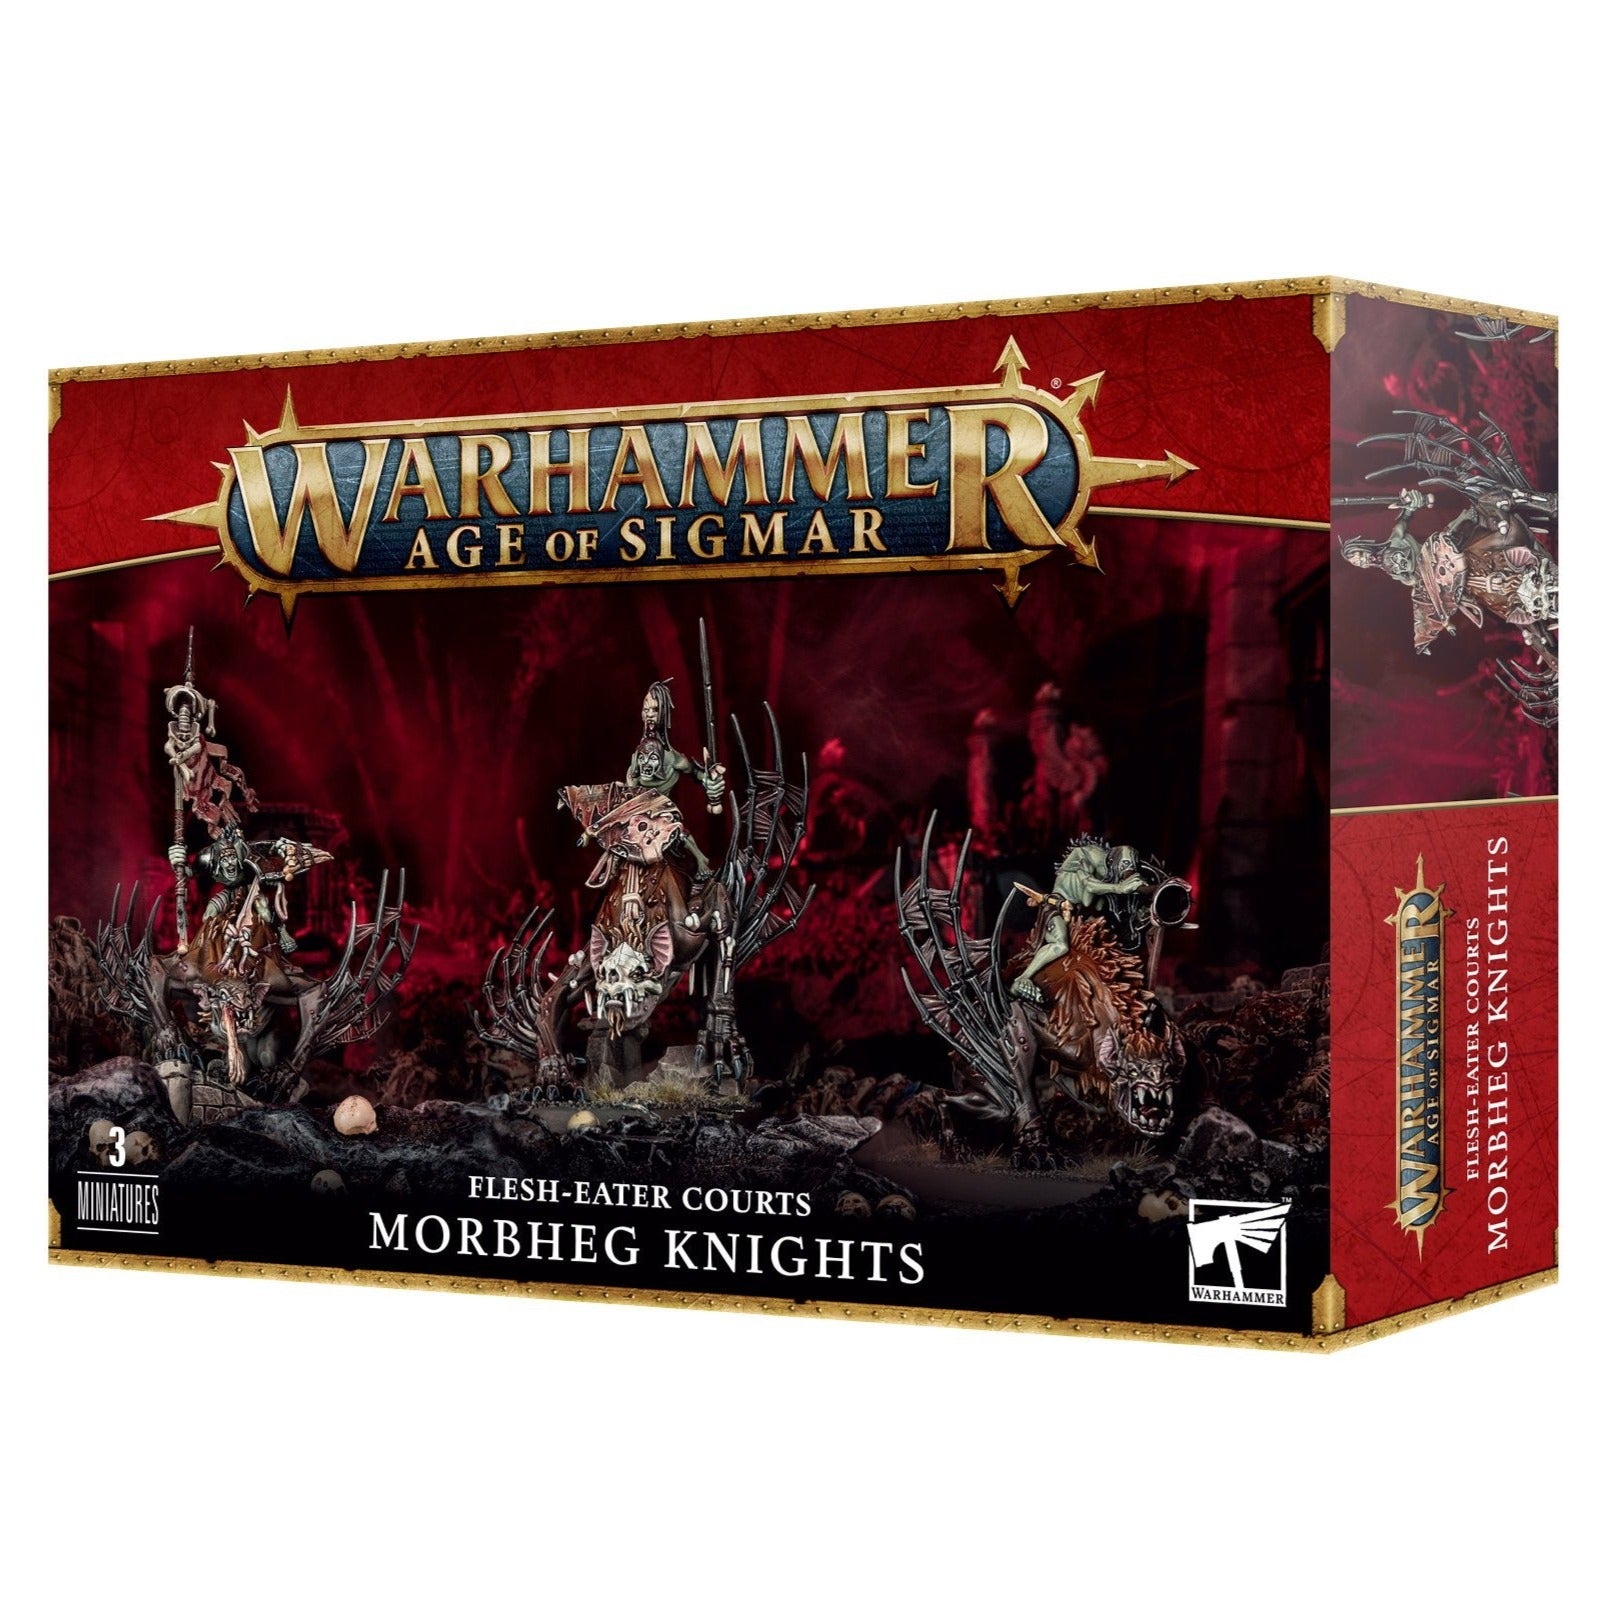 Flesh-Eater Courts: Morbheg Knights - Release Date 17/2/24 - Loaded Dice